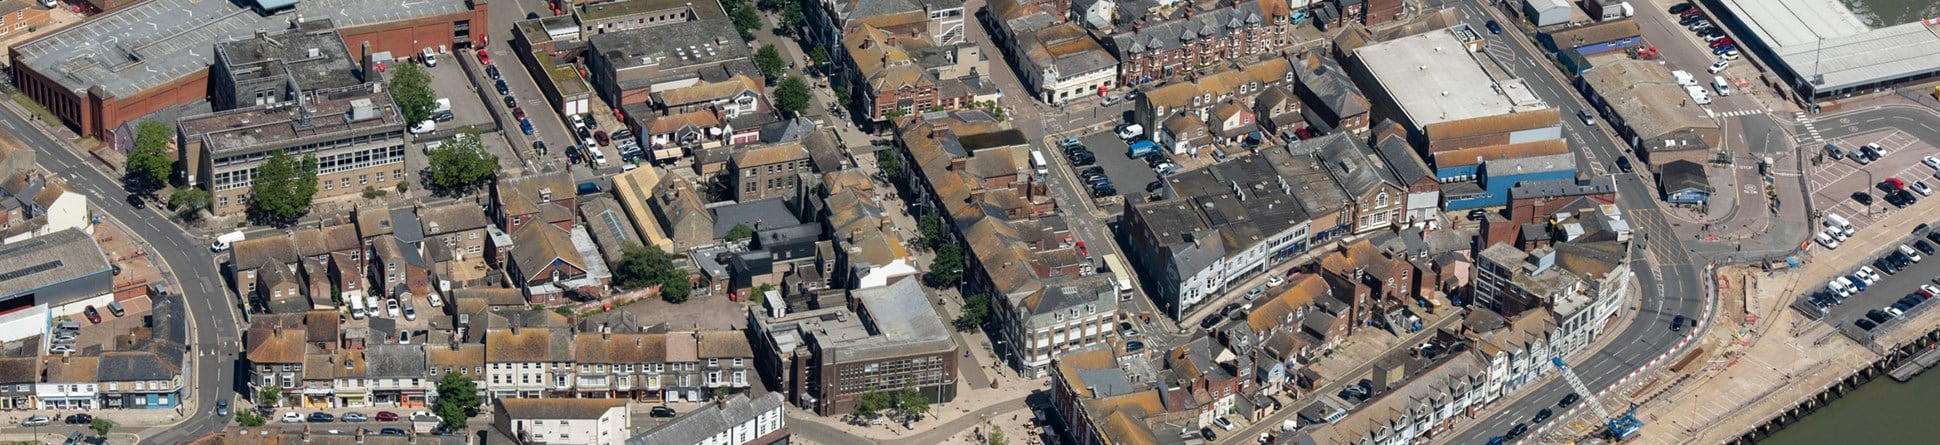 Aerial view of Lowestoft town with dock areas bottom right and top right.